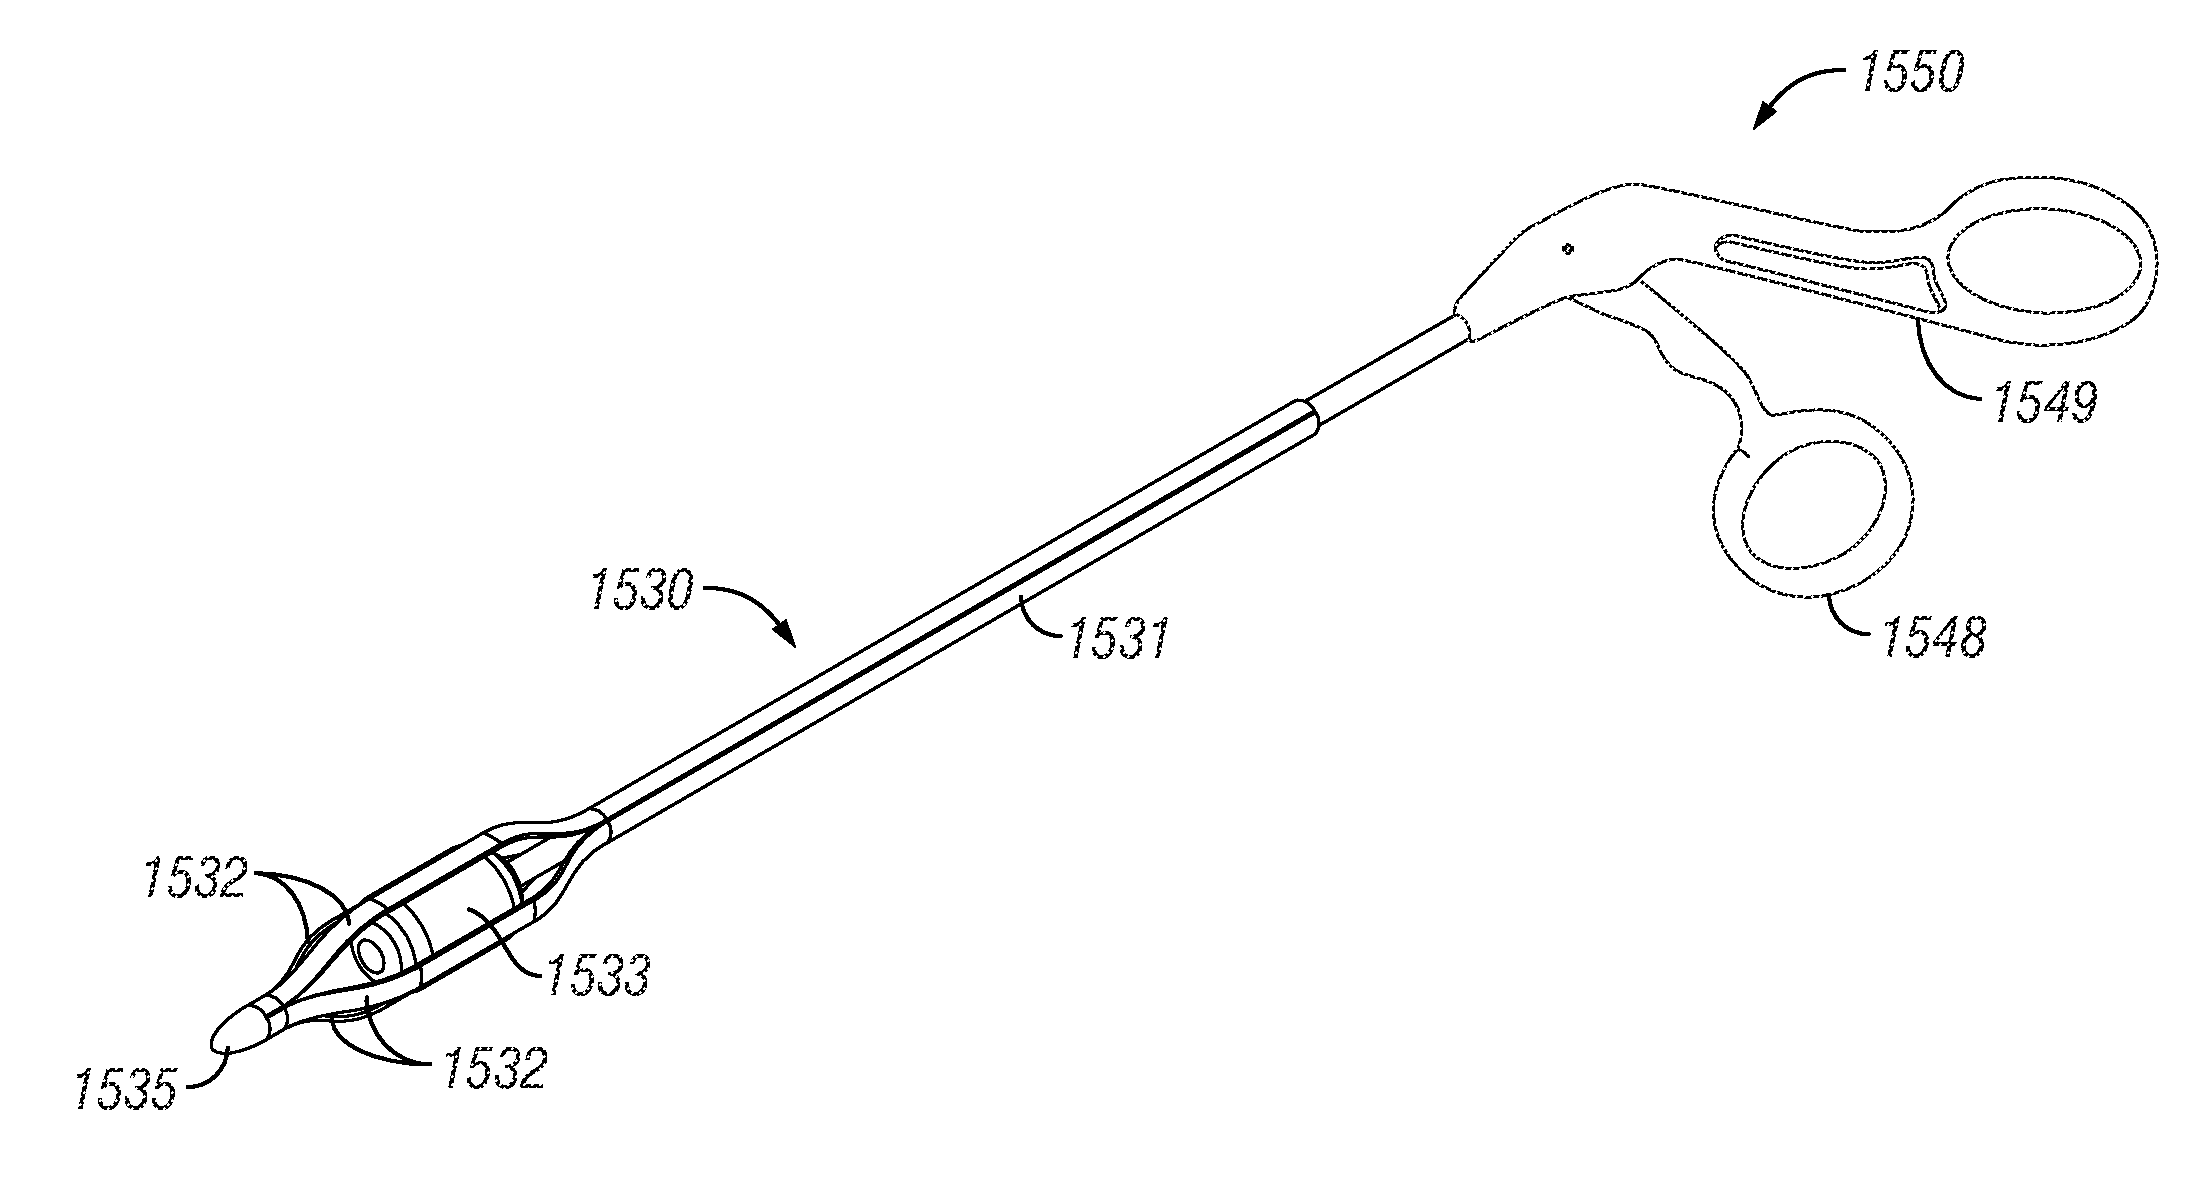 Systems, Devices and Methods for Providing Therapy to an Anatomical Structure